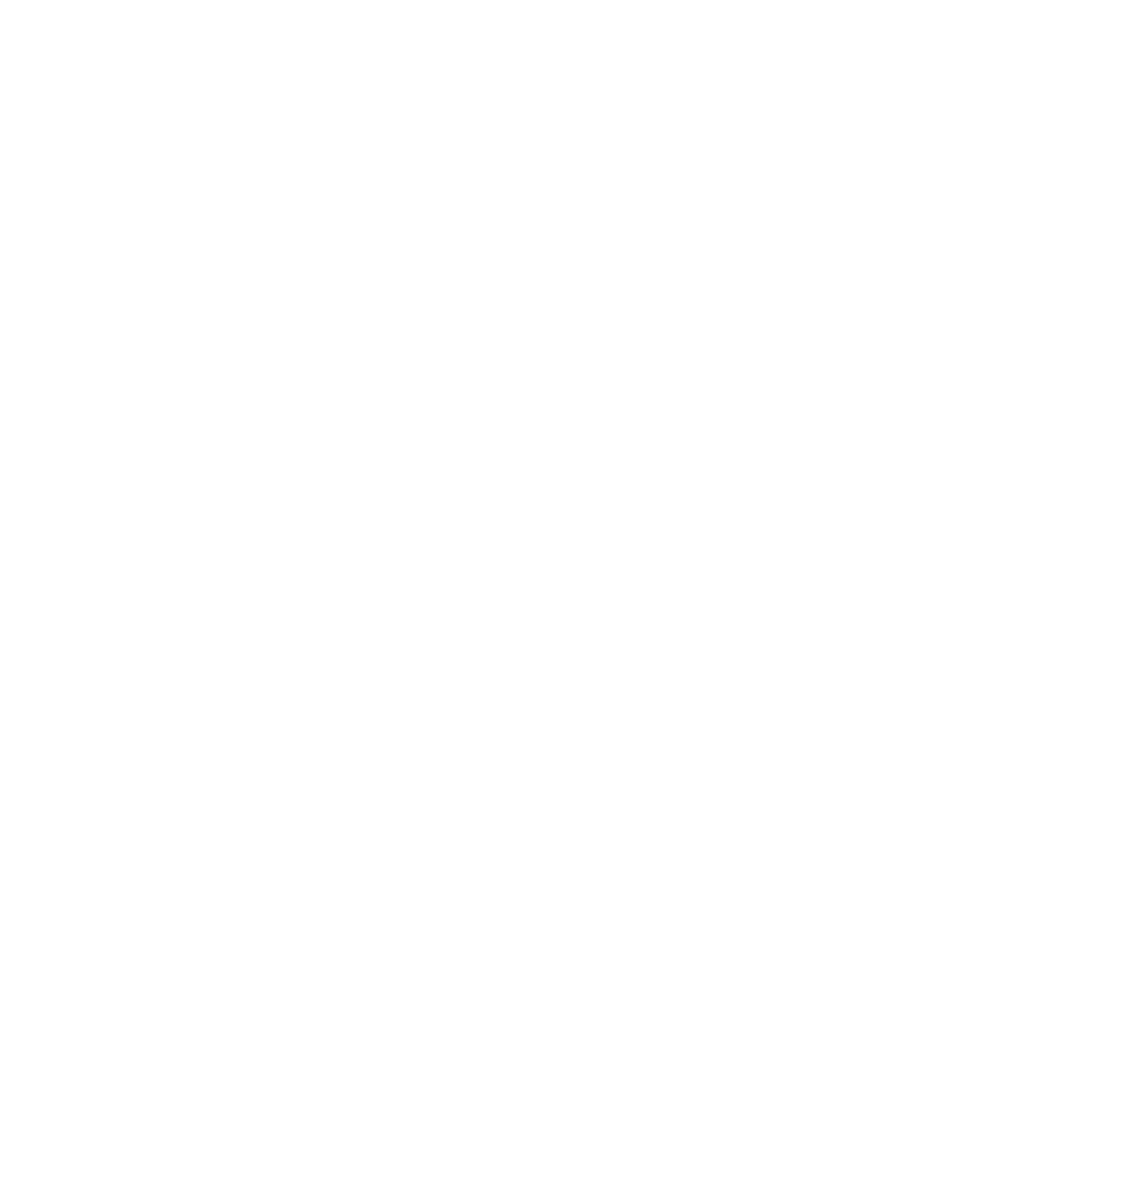 Sister Circle Logo - Spreading & Supporting Women's Circles Around the Globe.